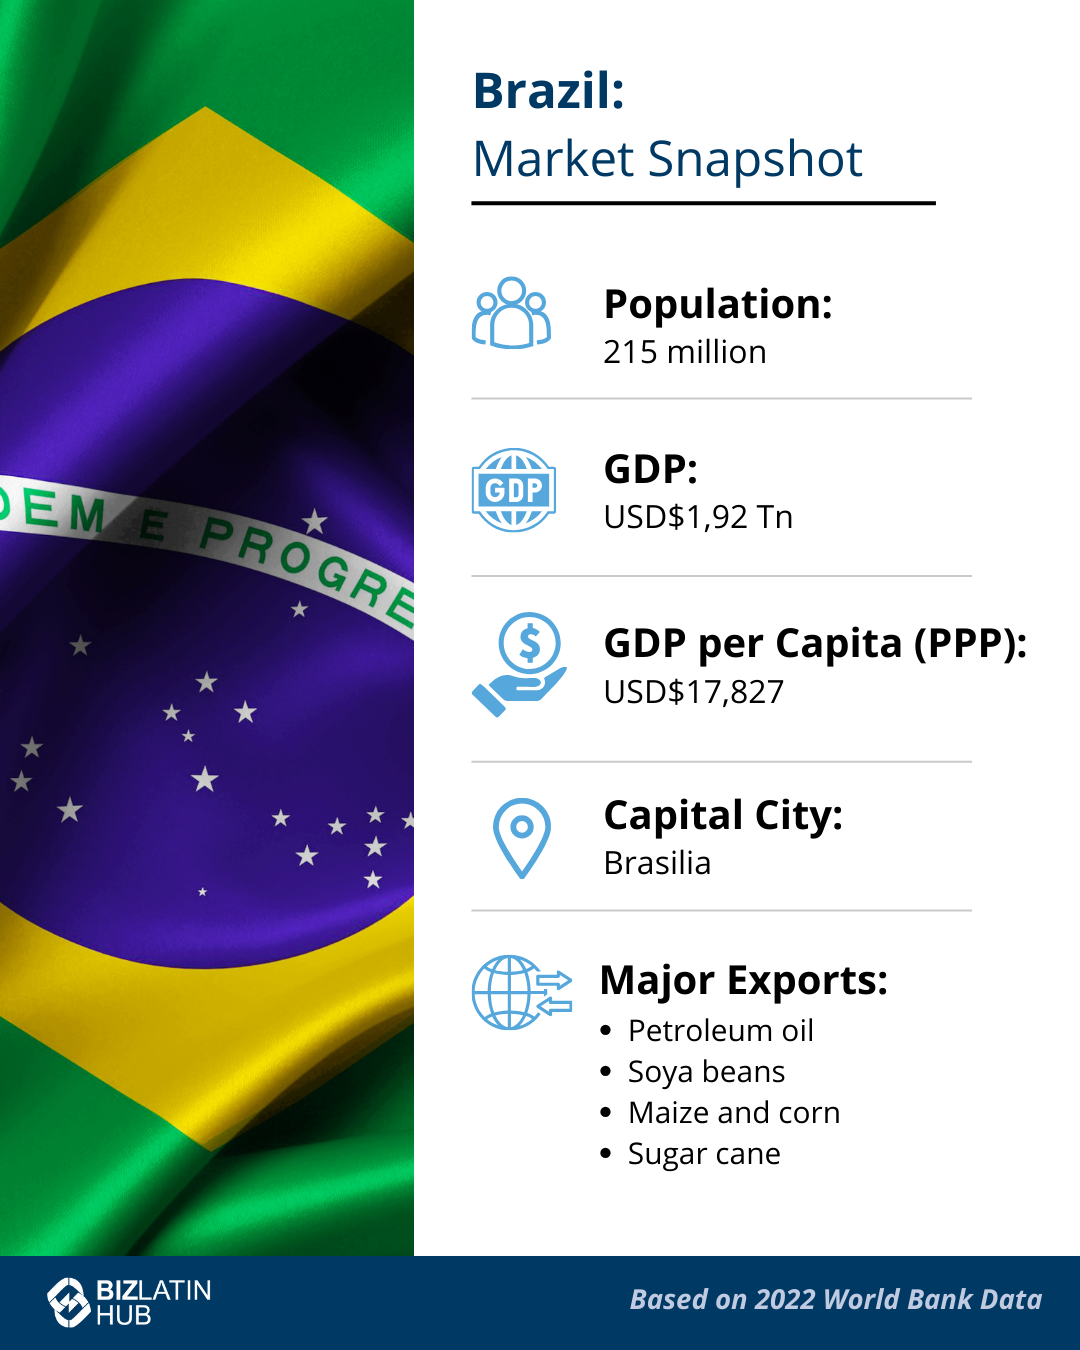 Infographic titled "Brazil: Market Snapshot" with the Brazilian flag in the background. It provides data: Population of 215 million, GDP of USD$1.92 trillion, GDP per Capita (PPP) of USD$17,827, Capital City: Brasilia, and Major Exports: petroleum oil, soybeans, maize and corn, and sugar cane. Based on 2022